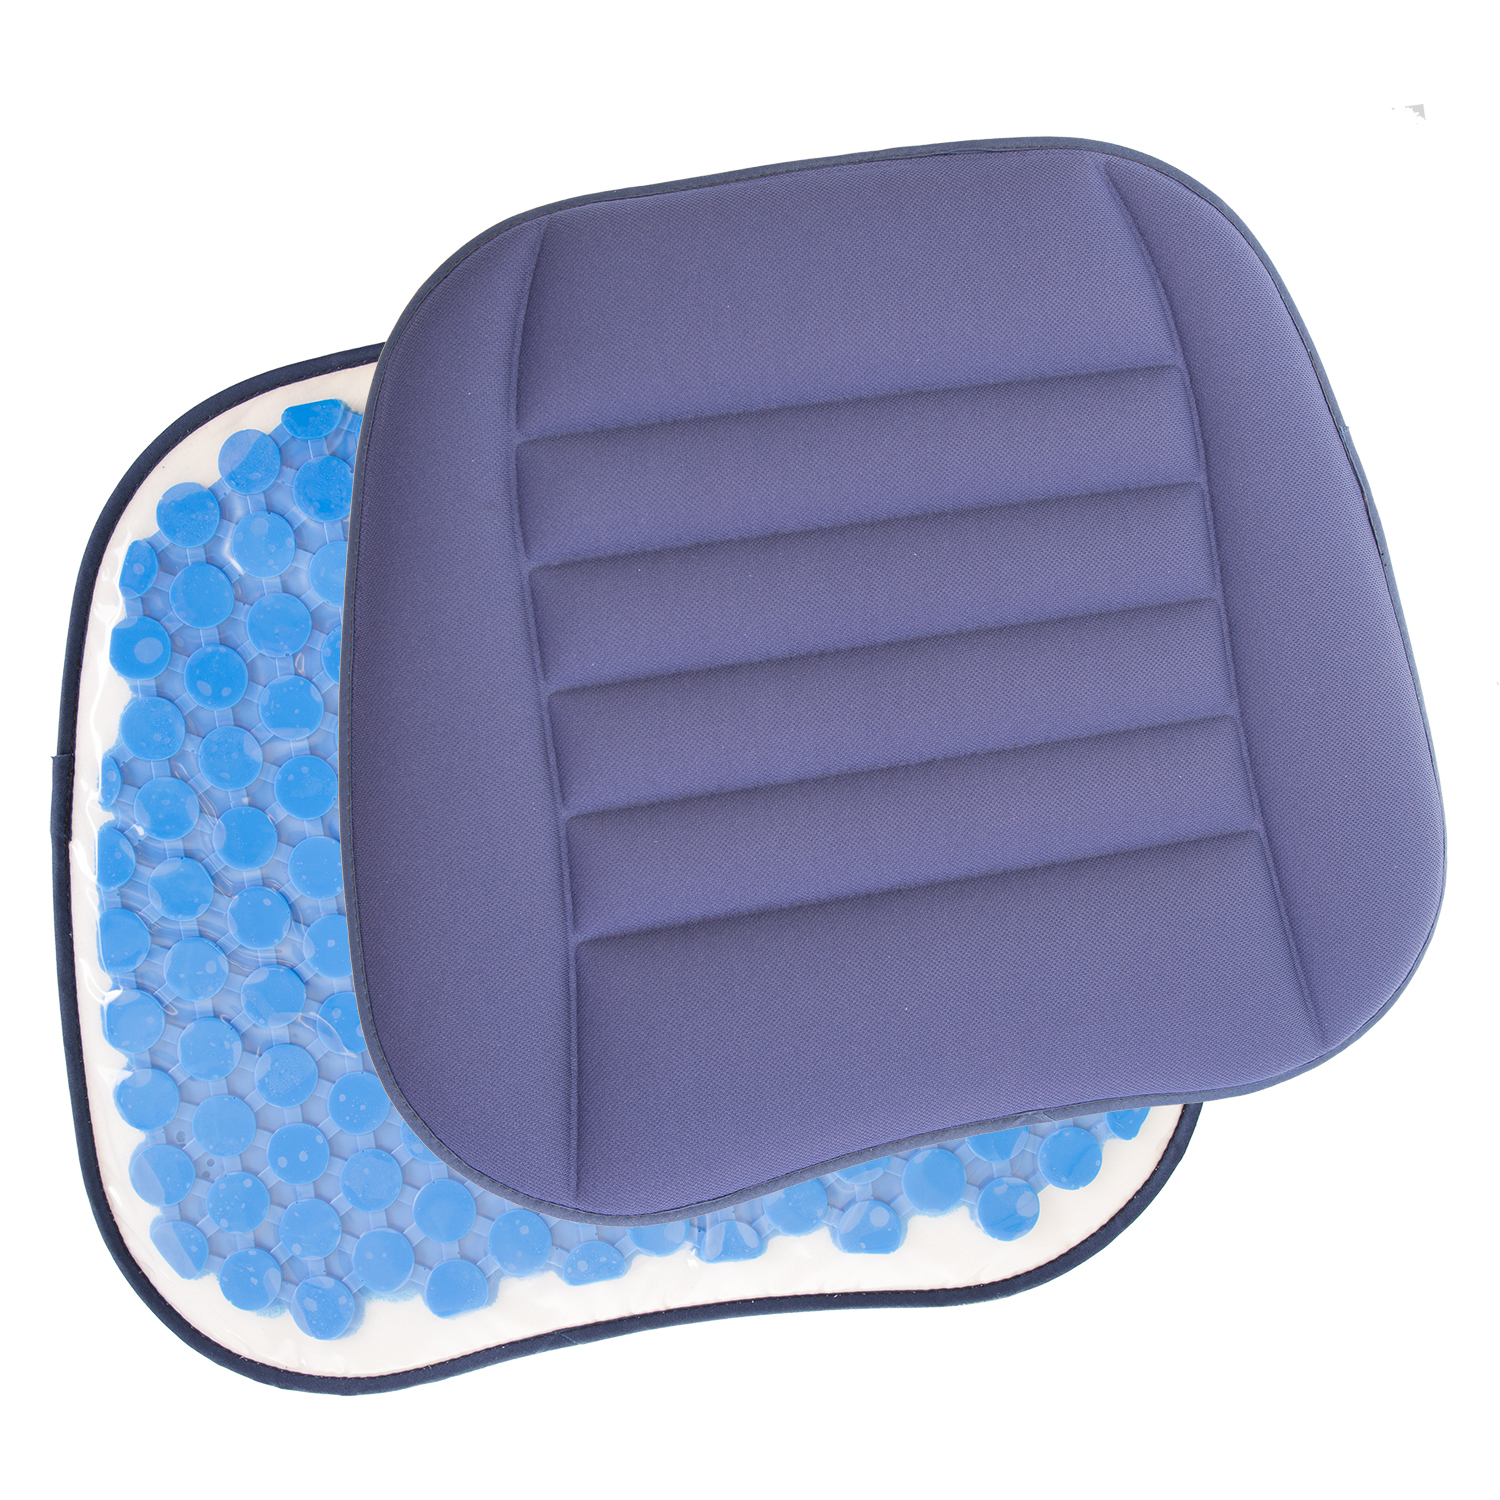 IMPACTO 907GEL MOLDED SEAT CUSHION BLUE FABRIC - Seat Pads